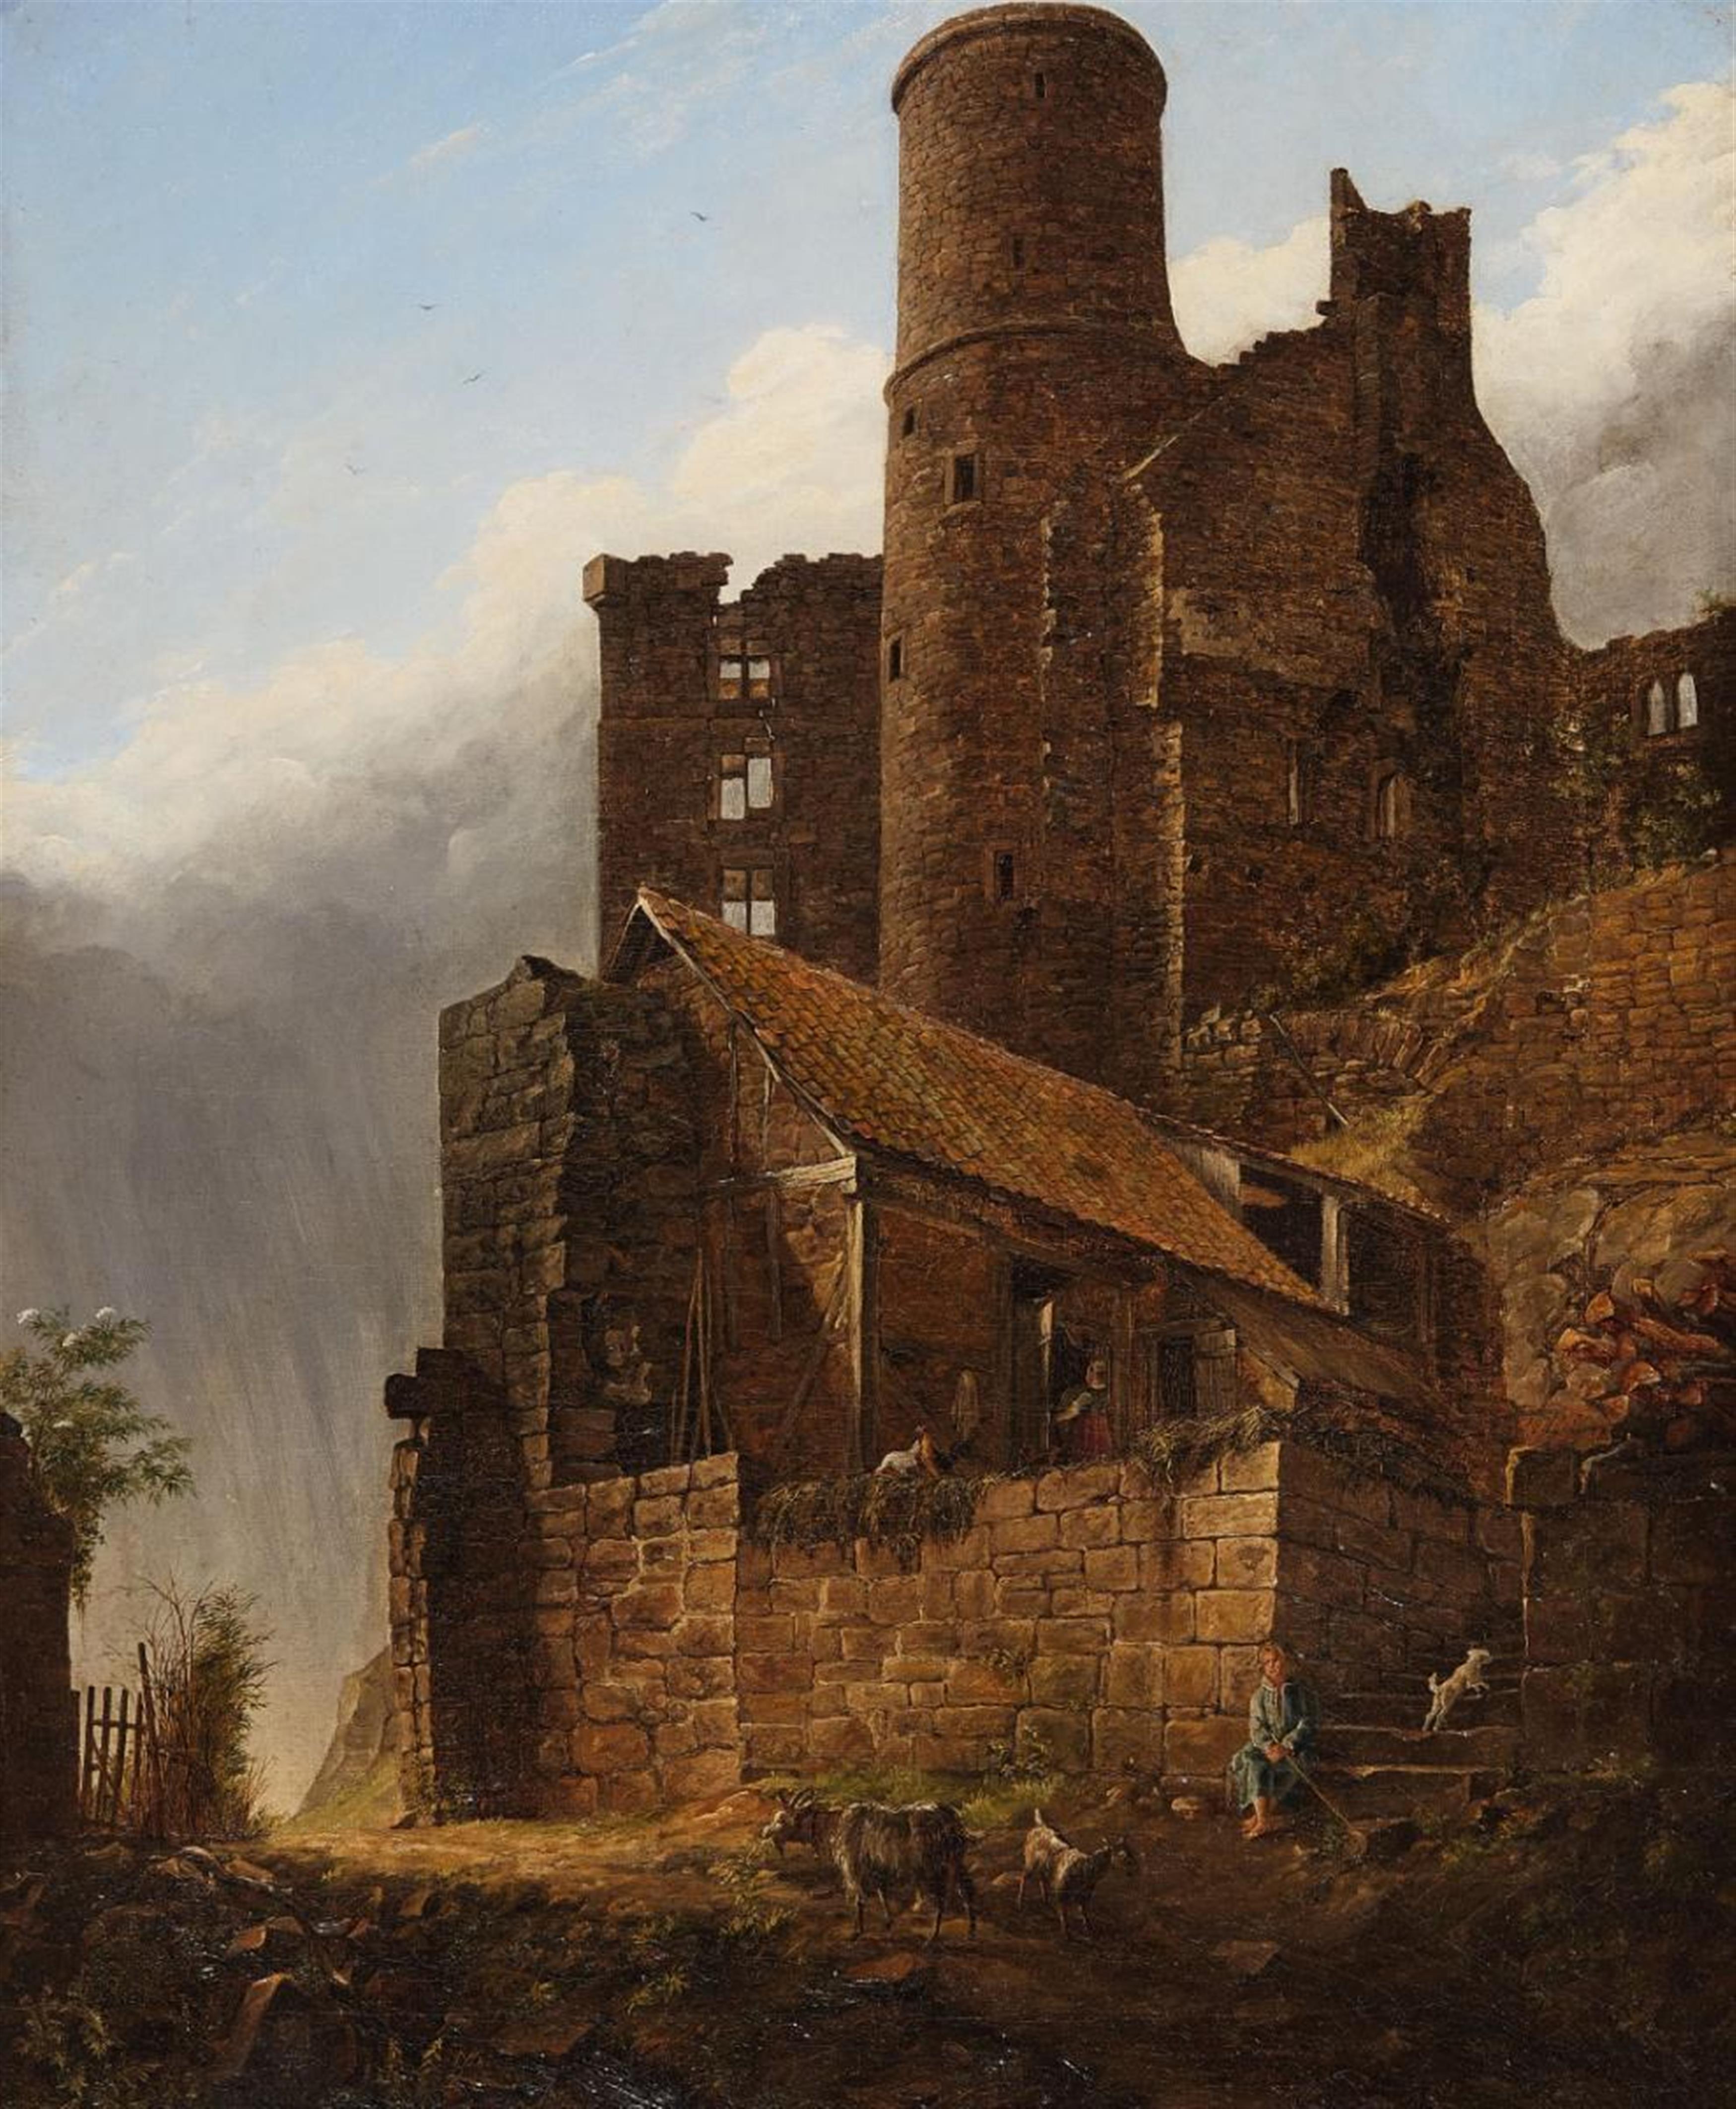 FRIEDRICH JOSEPH EHEMANT, attributed to - VIEW OF A RUINED CASTLE - image-1